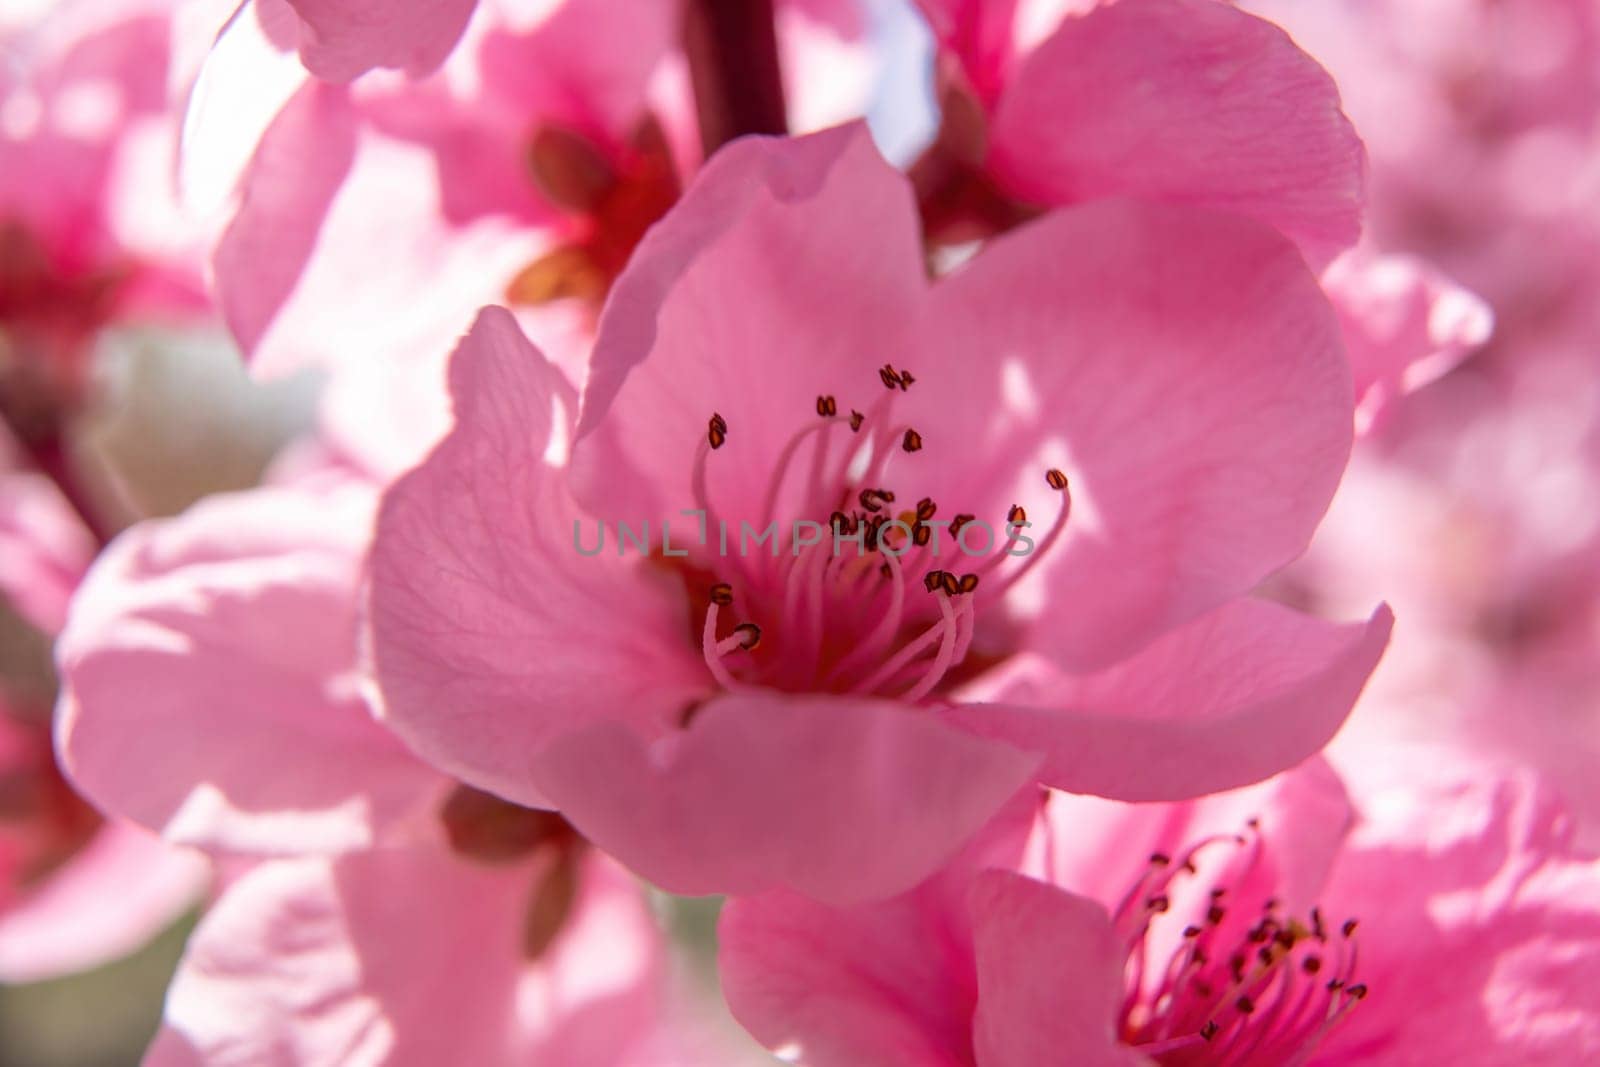 close up pink peach flower with a white center. The flower is surrounded by other pink flowers.